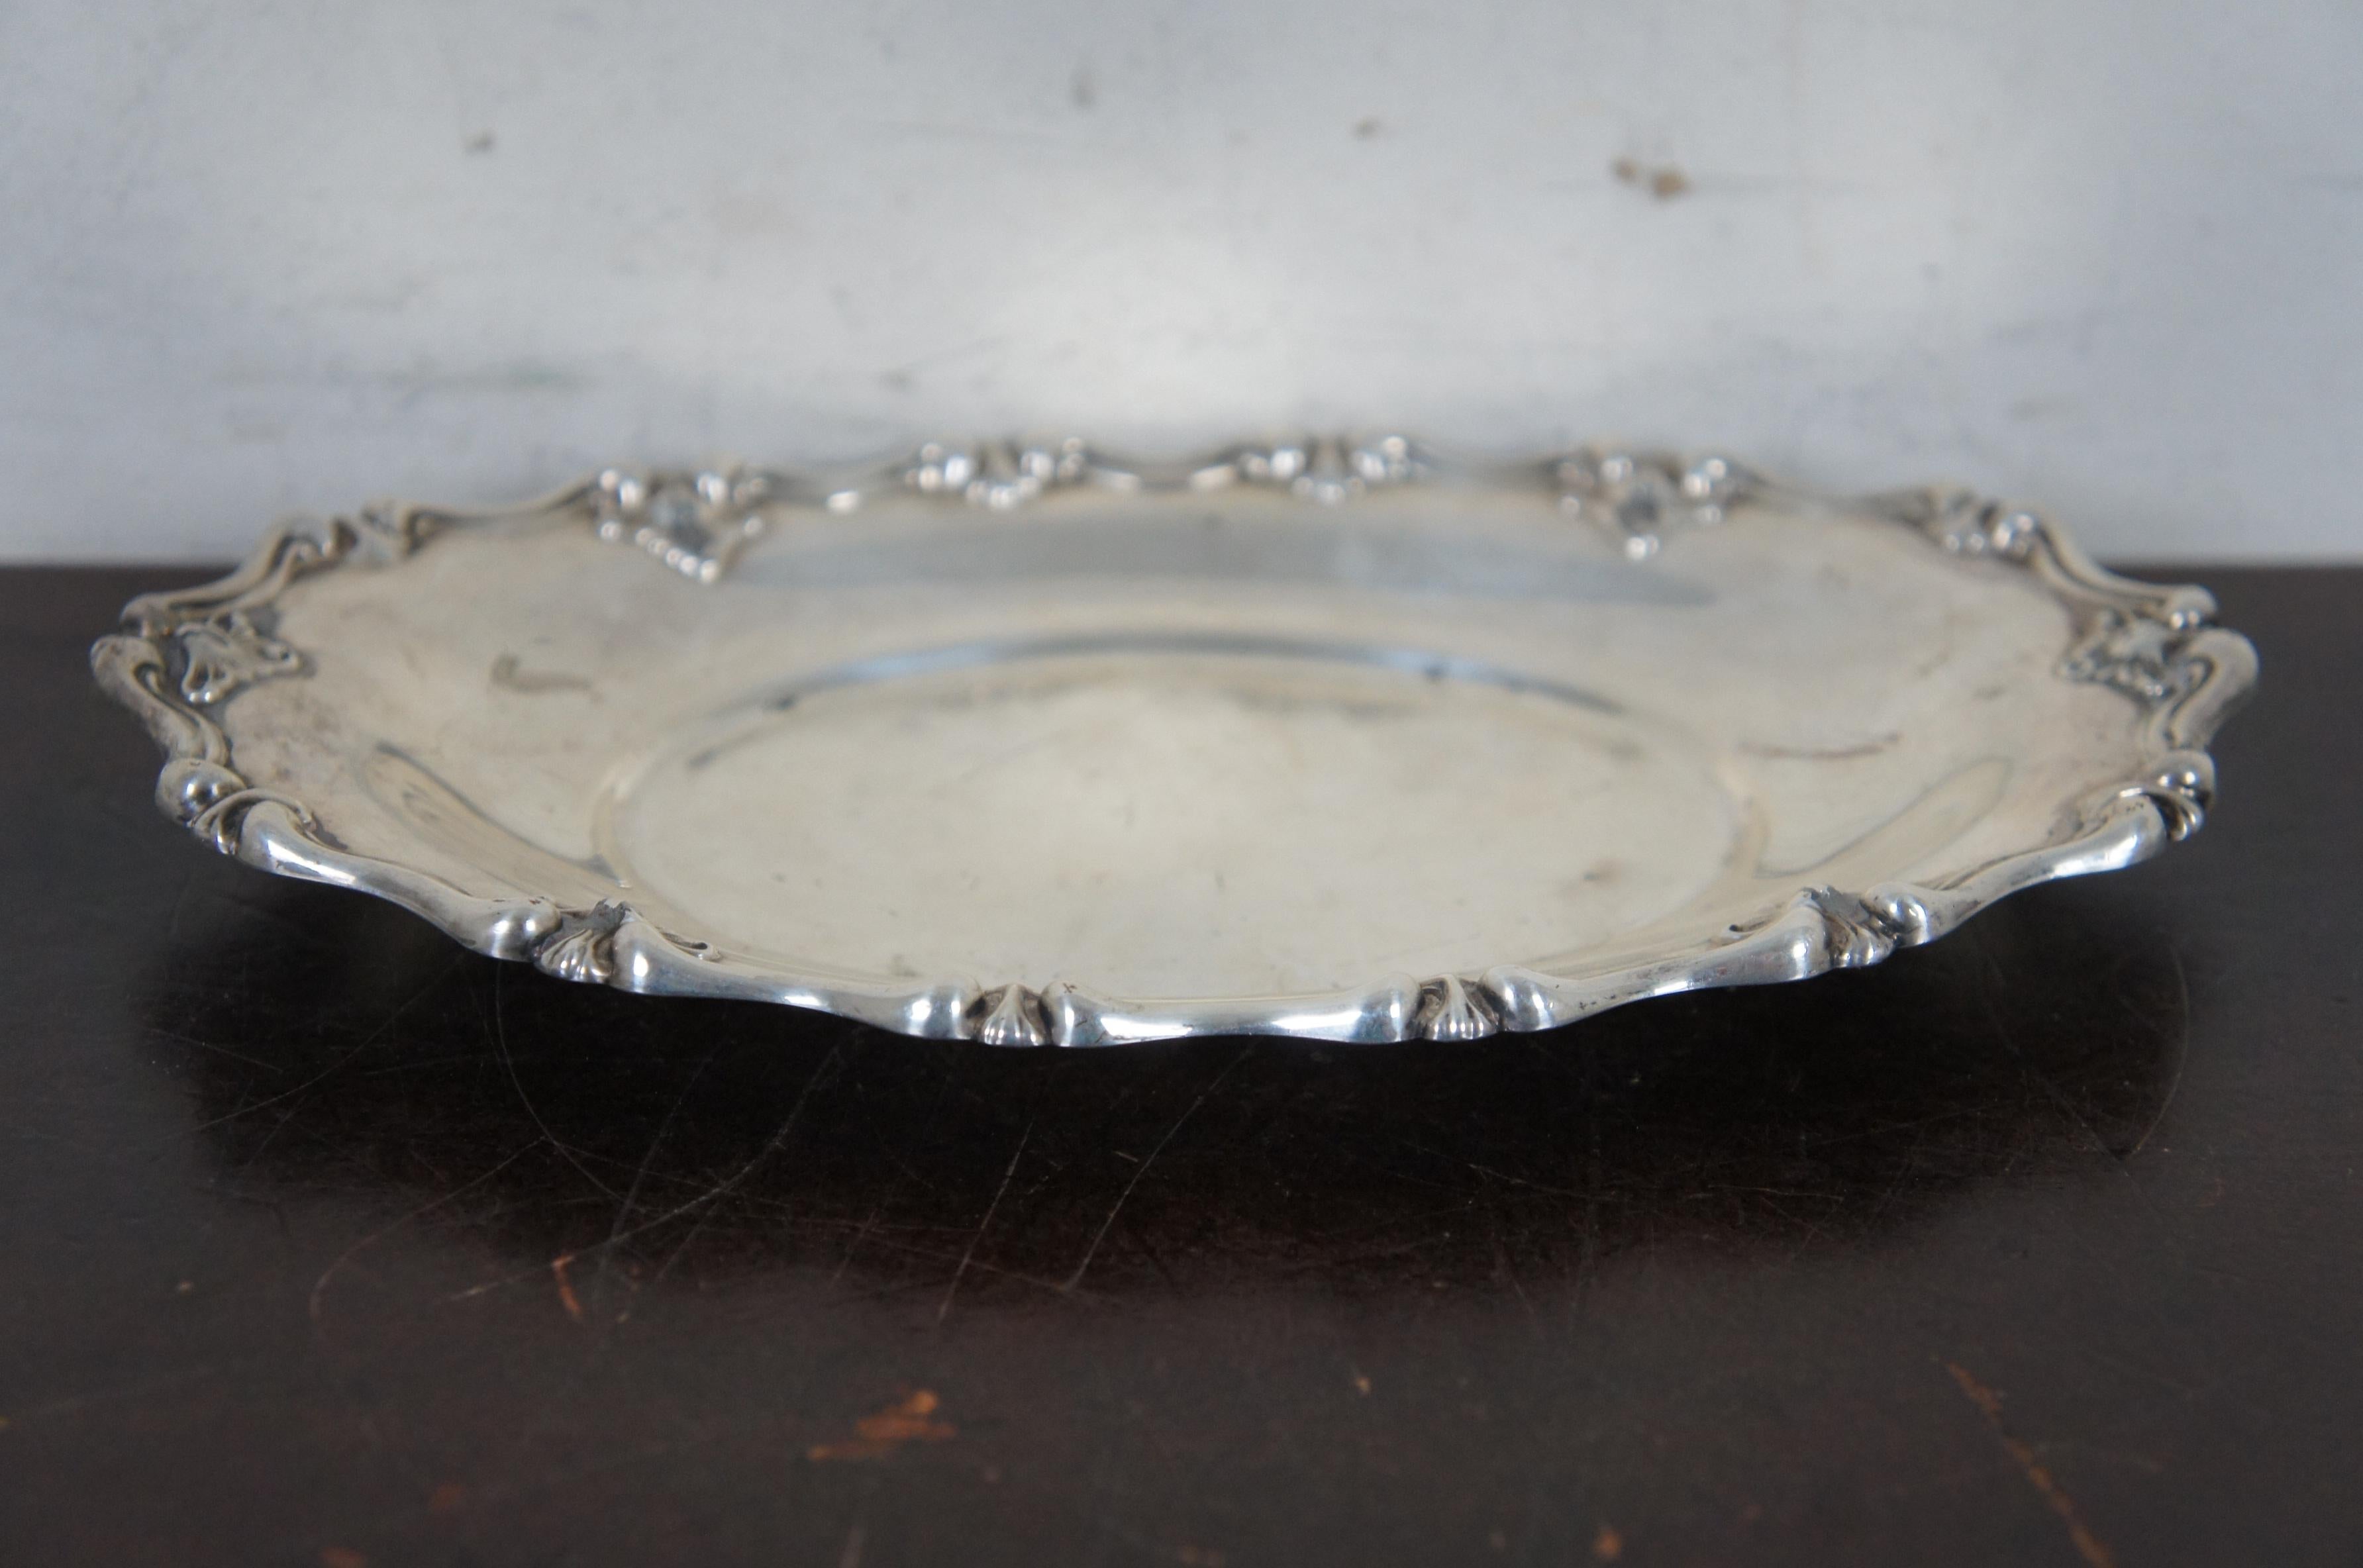 Spaulding & Co. Sterling Silver 925 Bread Tray Repousse Scalloped 3399 168g 6